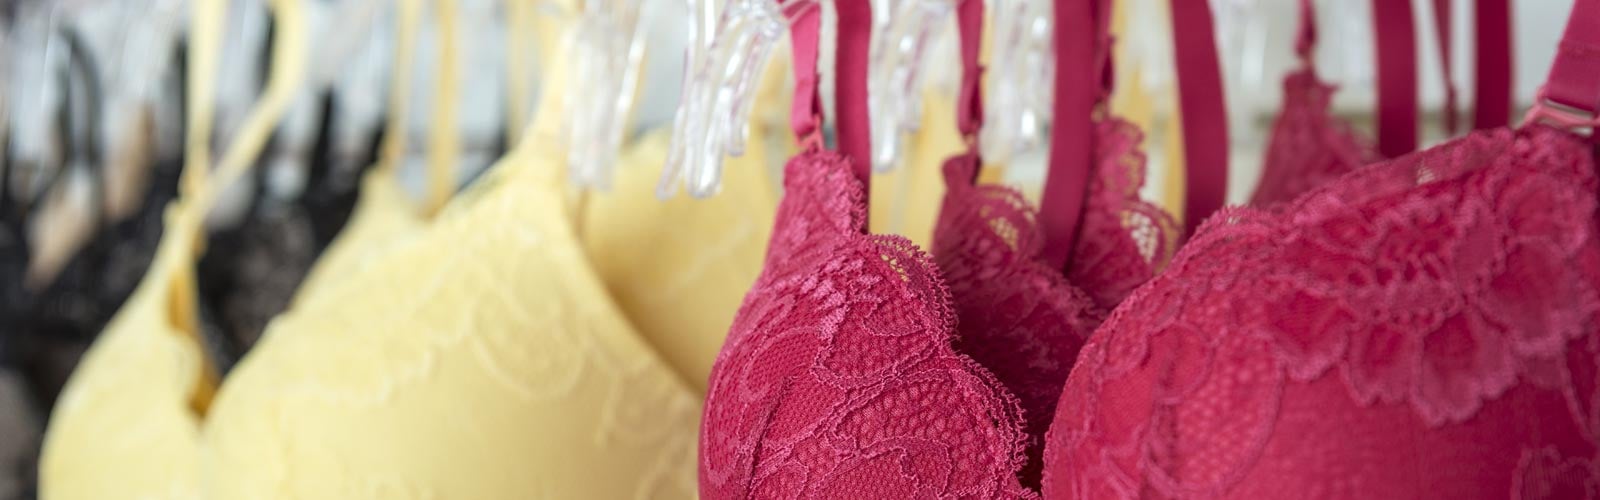 Questions About Bras